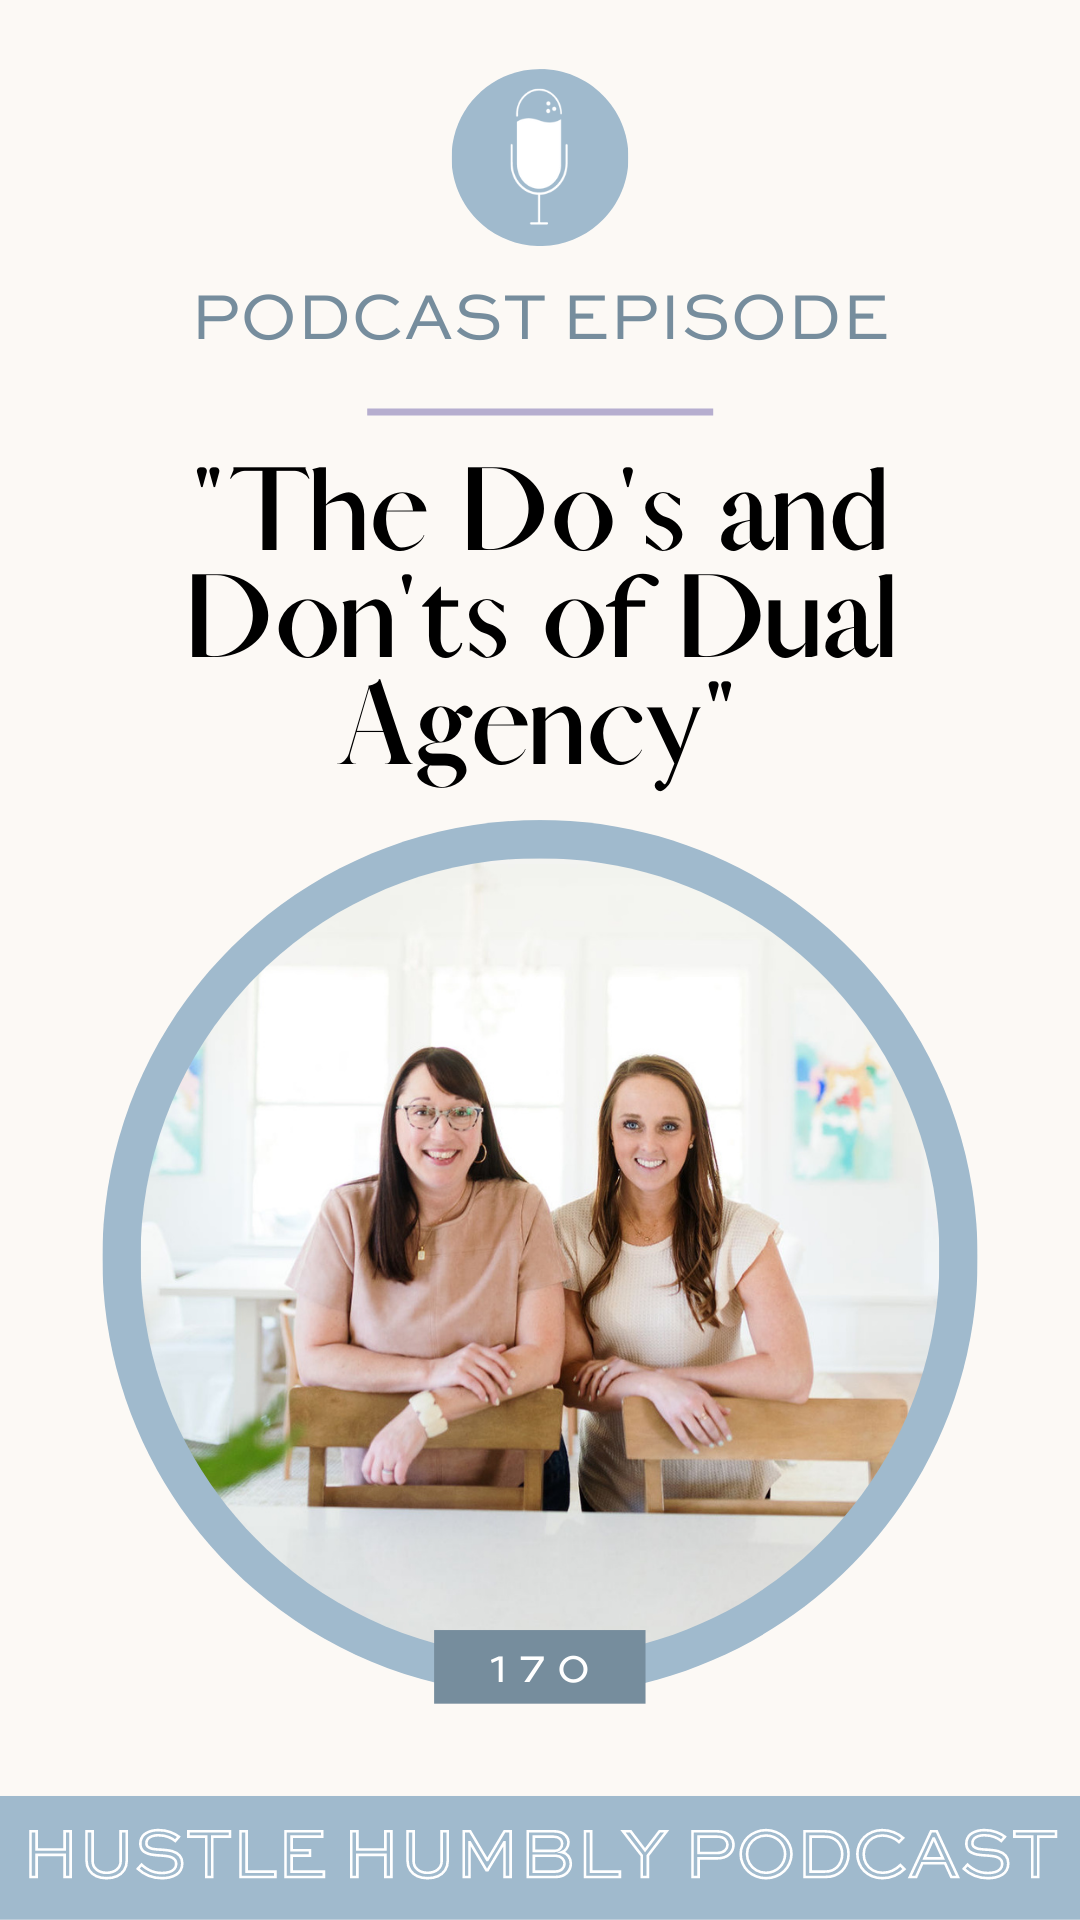 Hustle Humbly Podcast Episode 170: The Do’s and Don’ts of Dual Agency